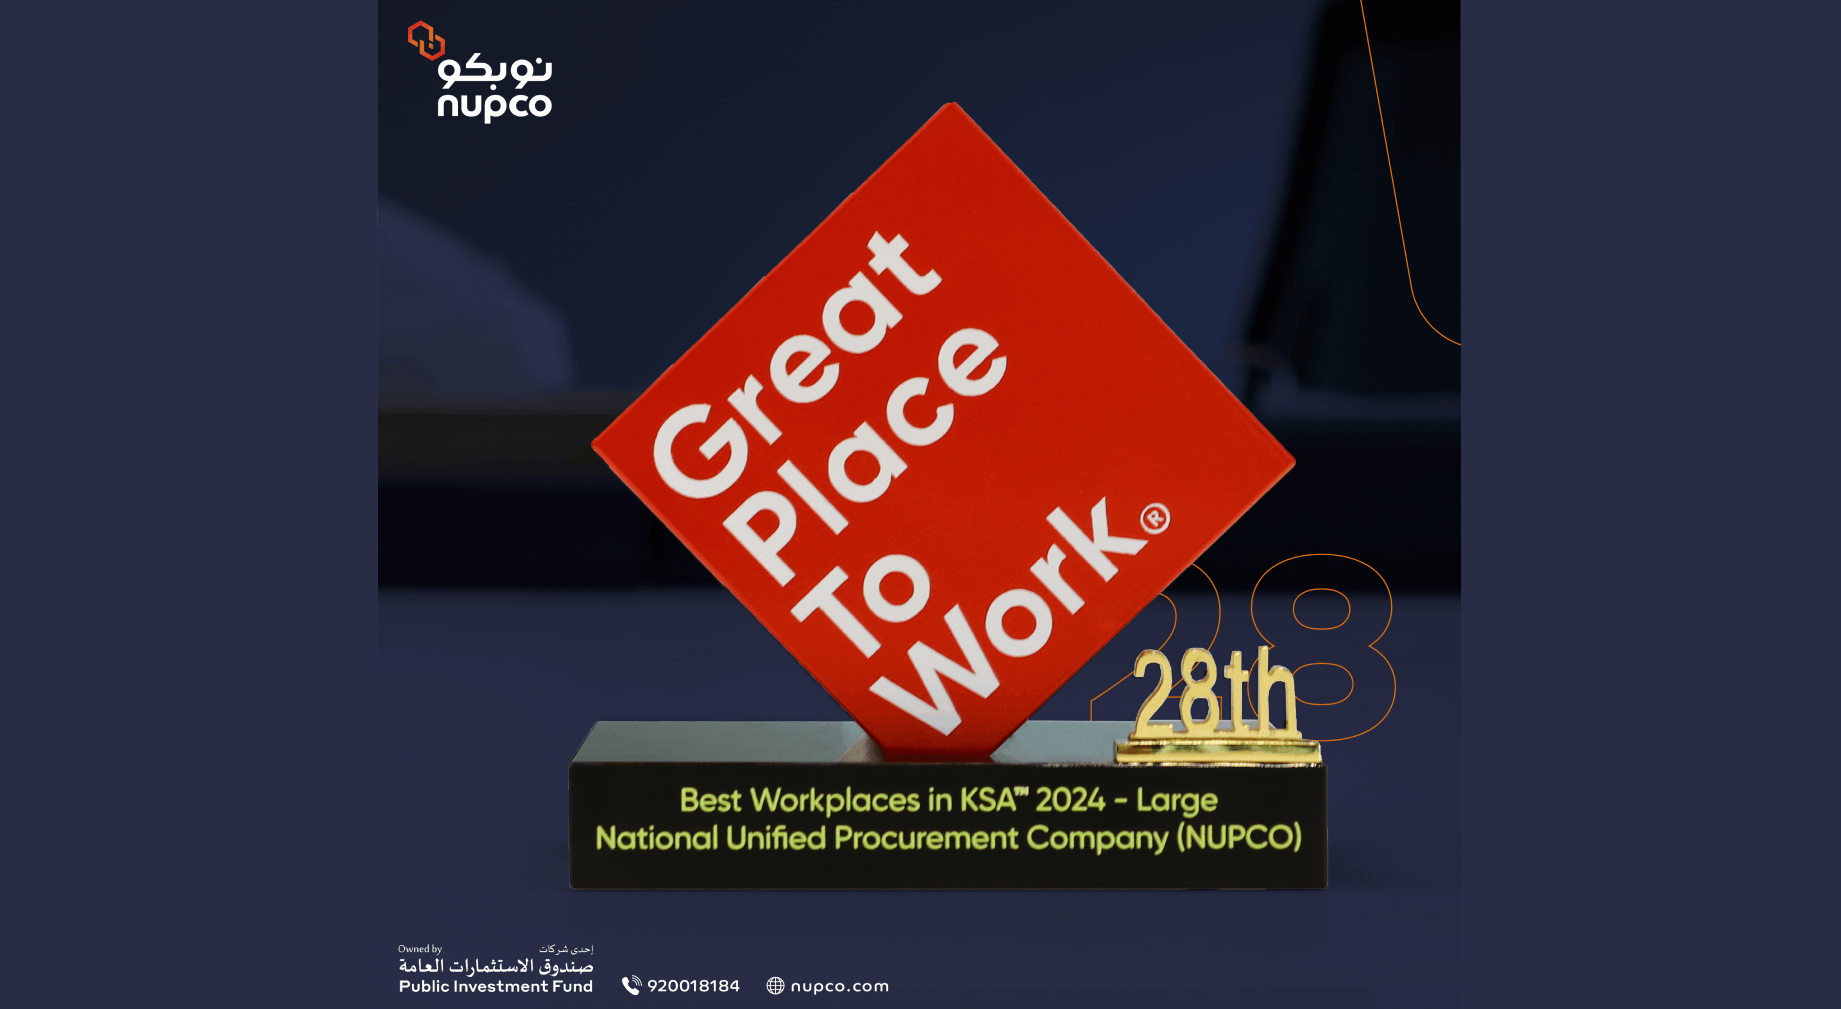 Nupco as one of the best 100 workplaces in Saudi Arabia for the year 2024